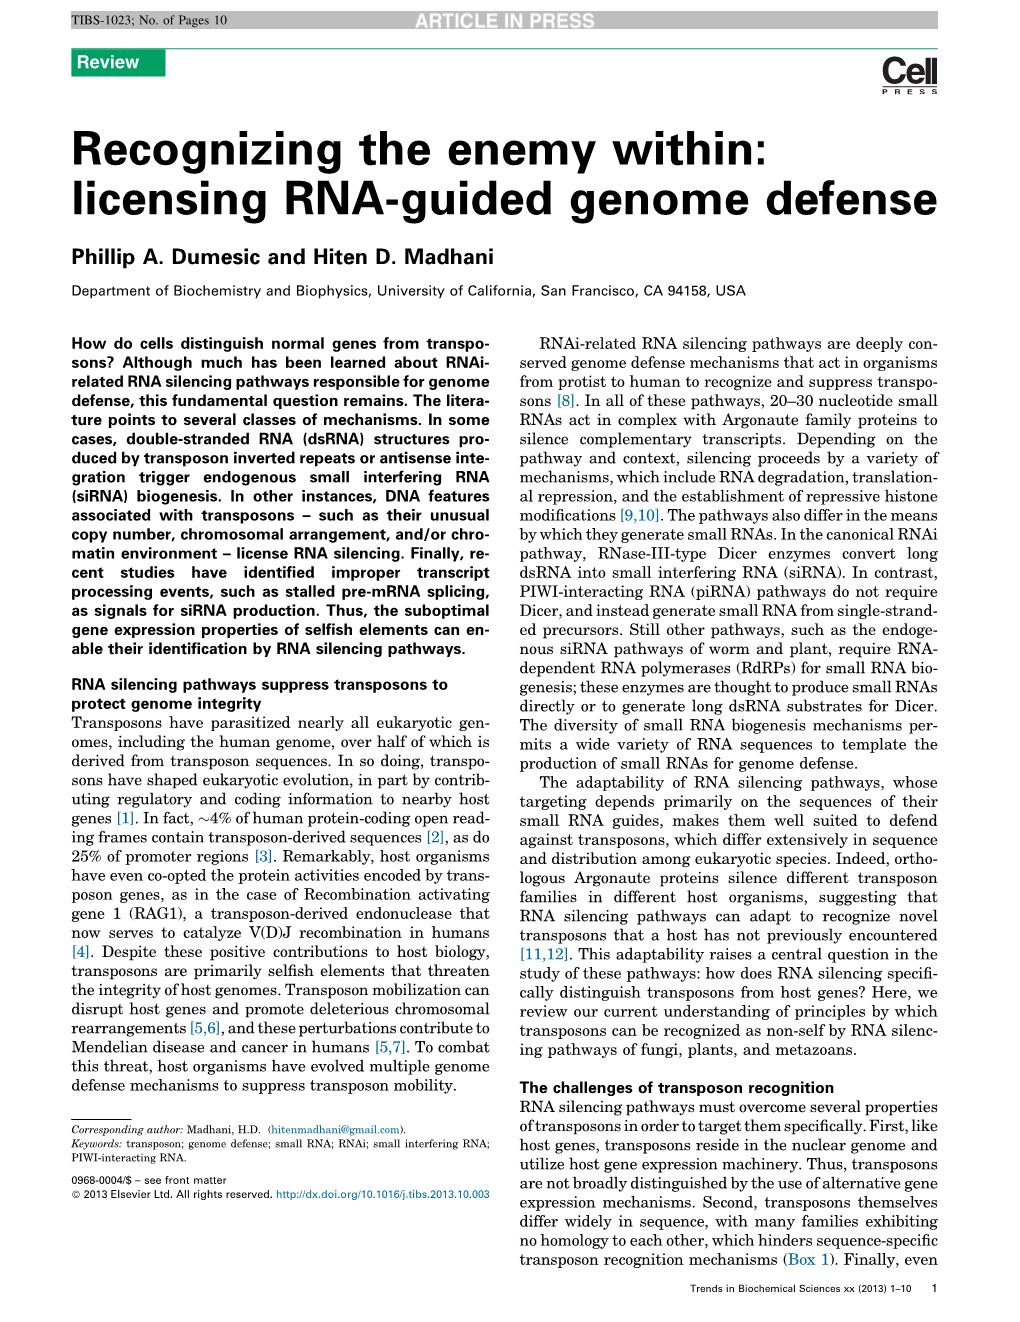 Licensing RNA-Guided Genome Defense